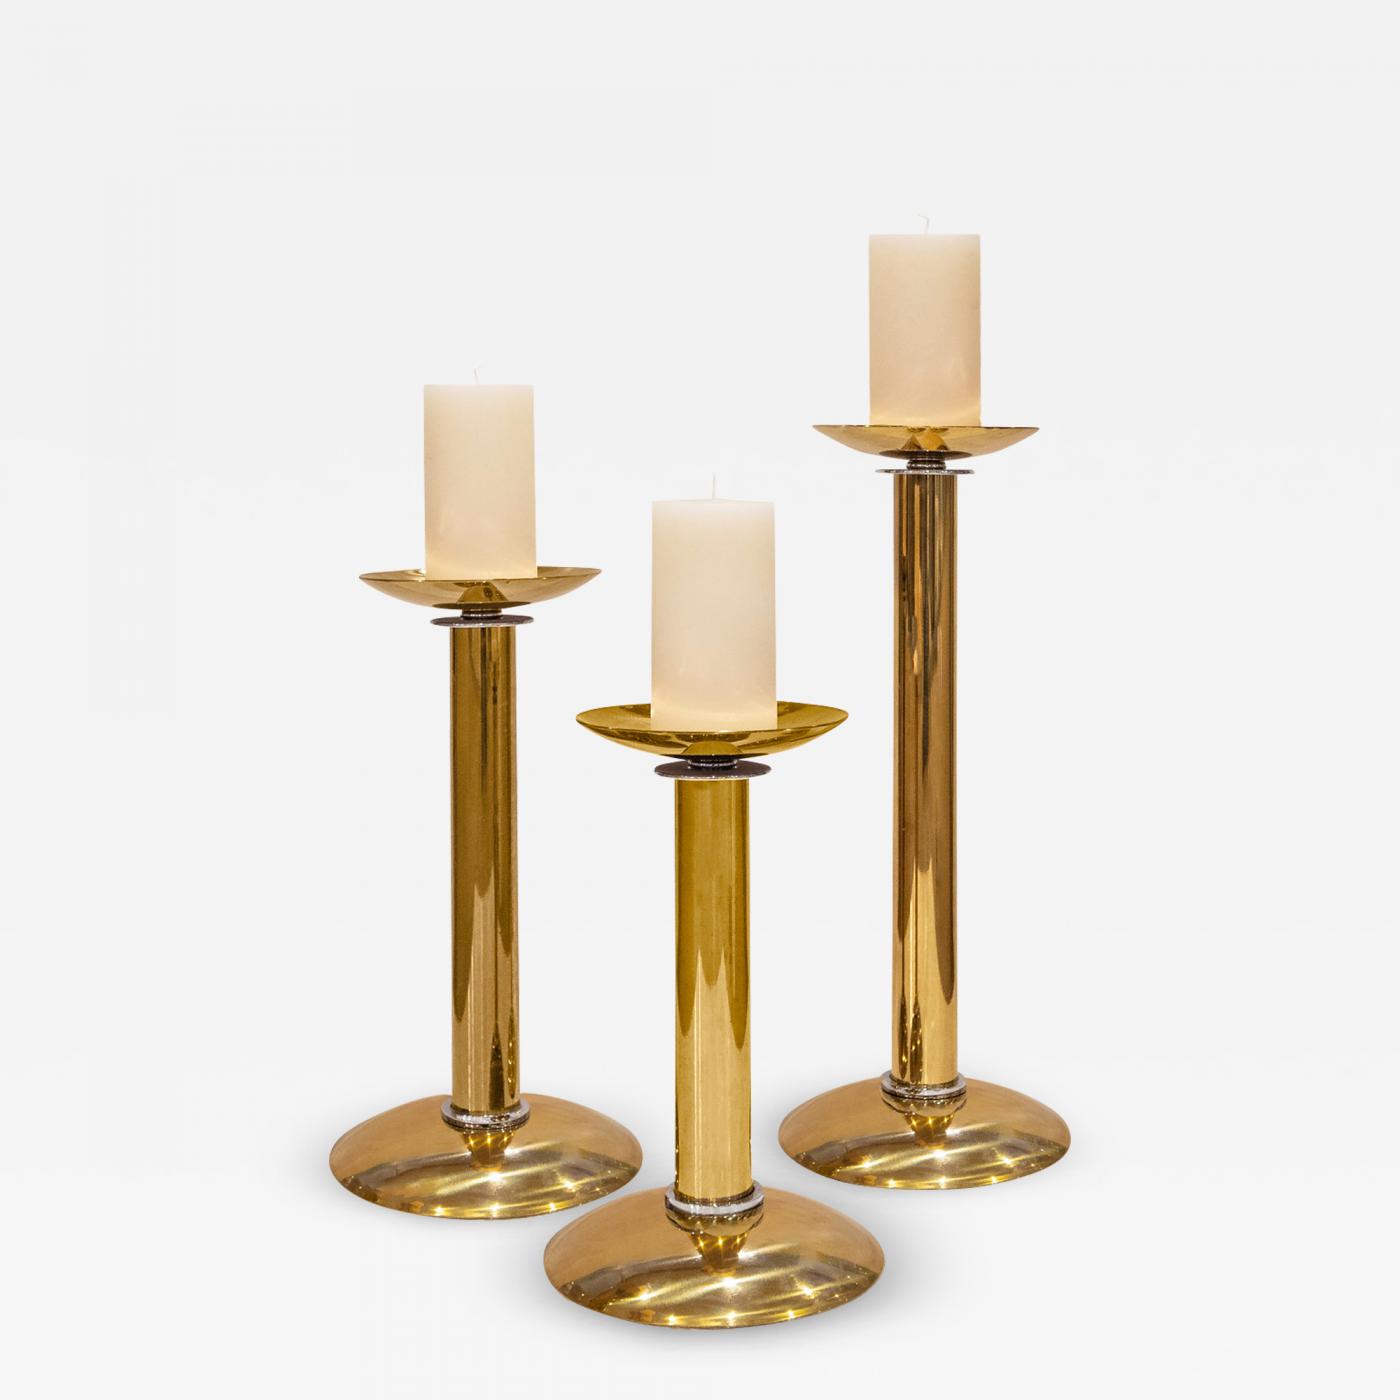 Karl Springer - Karl Springer Set of 3 Candle Holders in Brass with Chrome  Accents 1980s